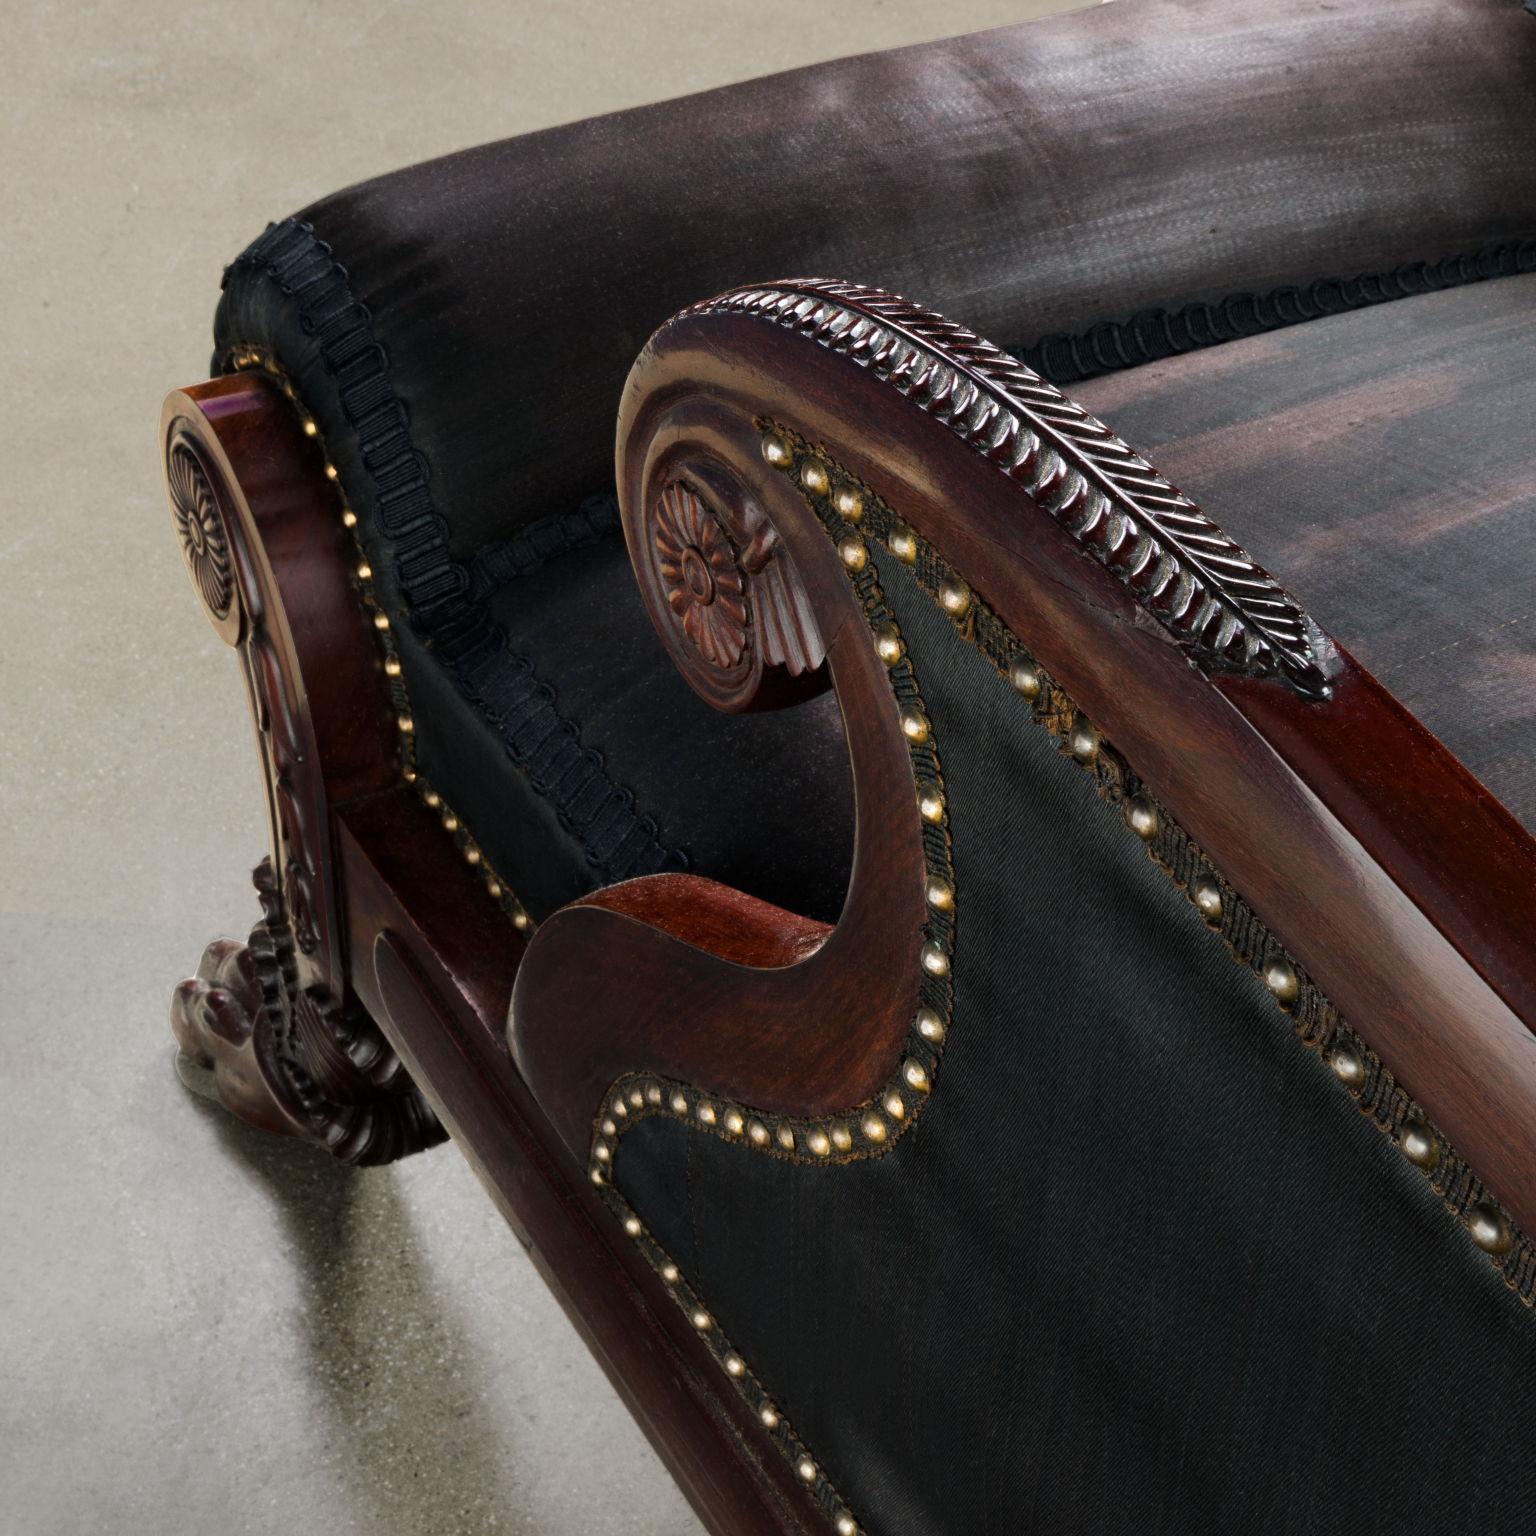 Mahogany Dormeuse. Milan, c. 1860, black and brown For Sale